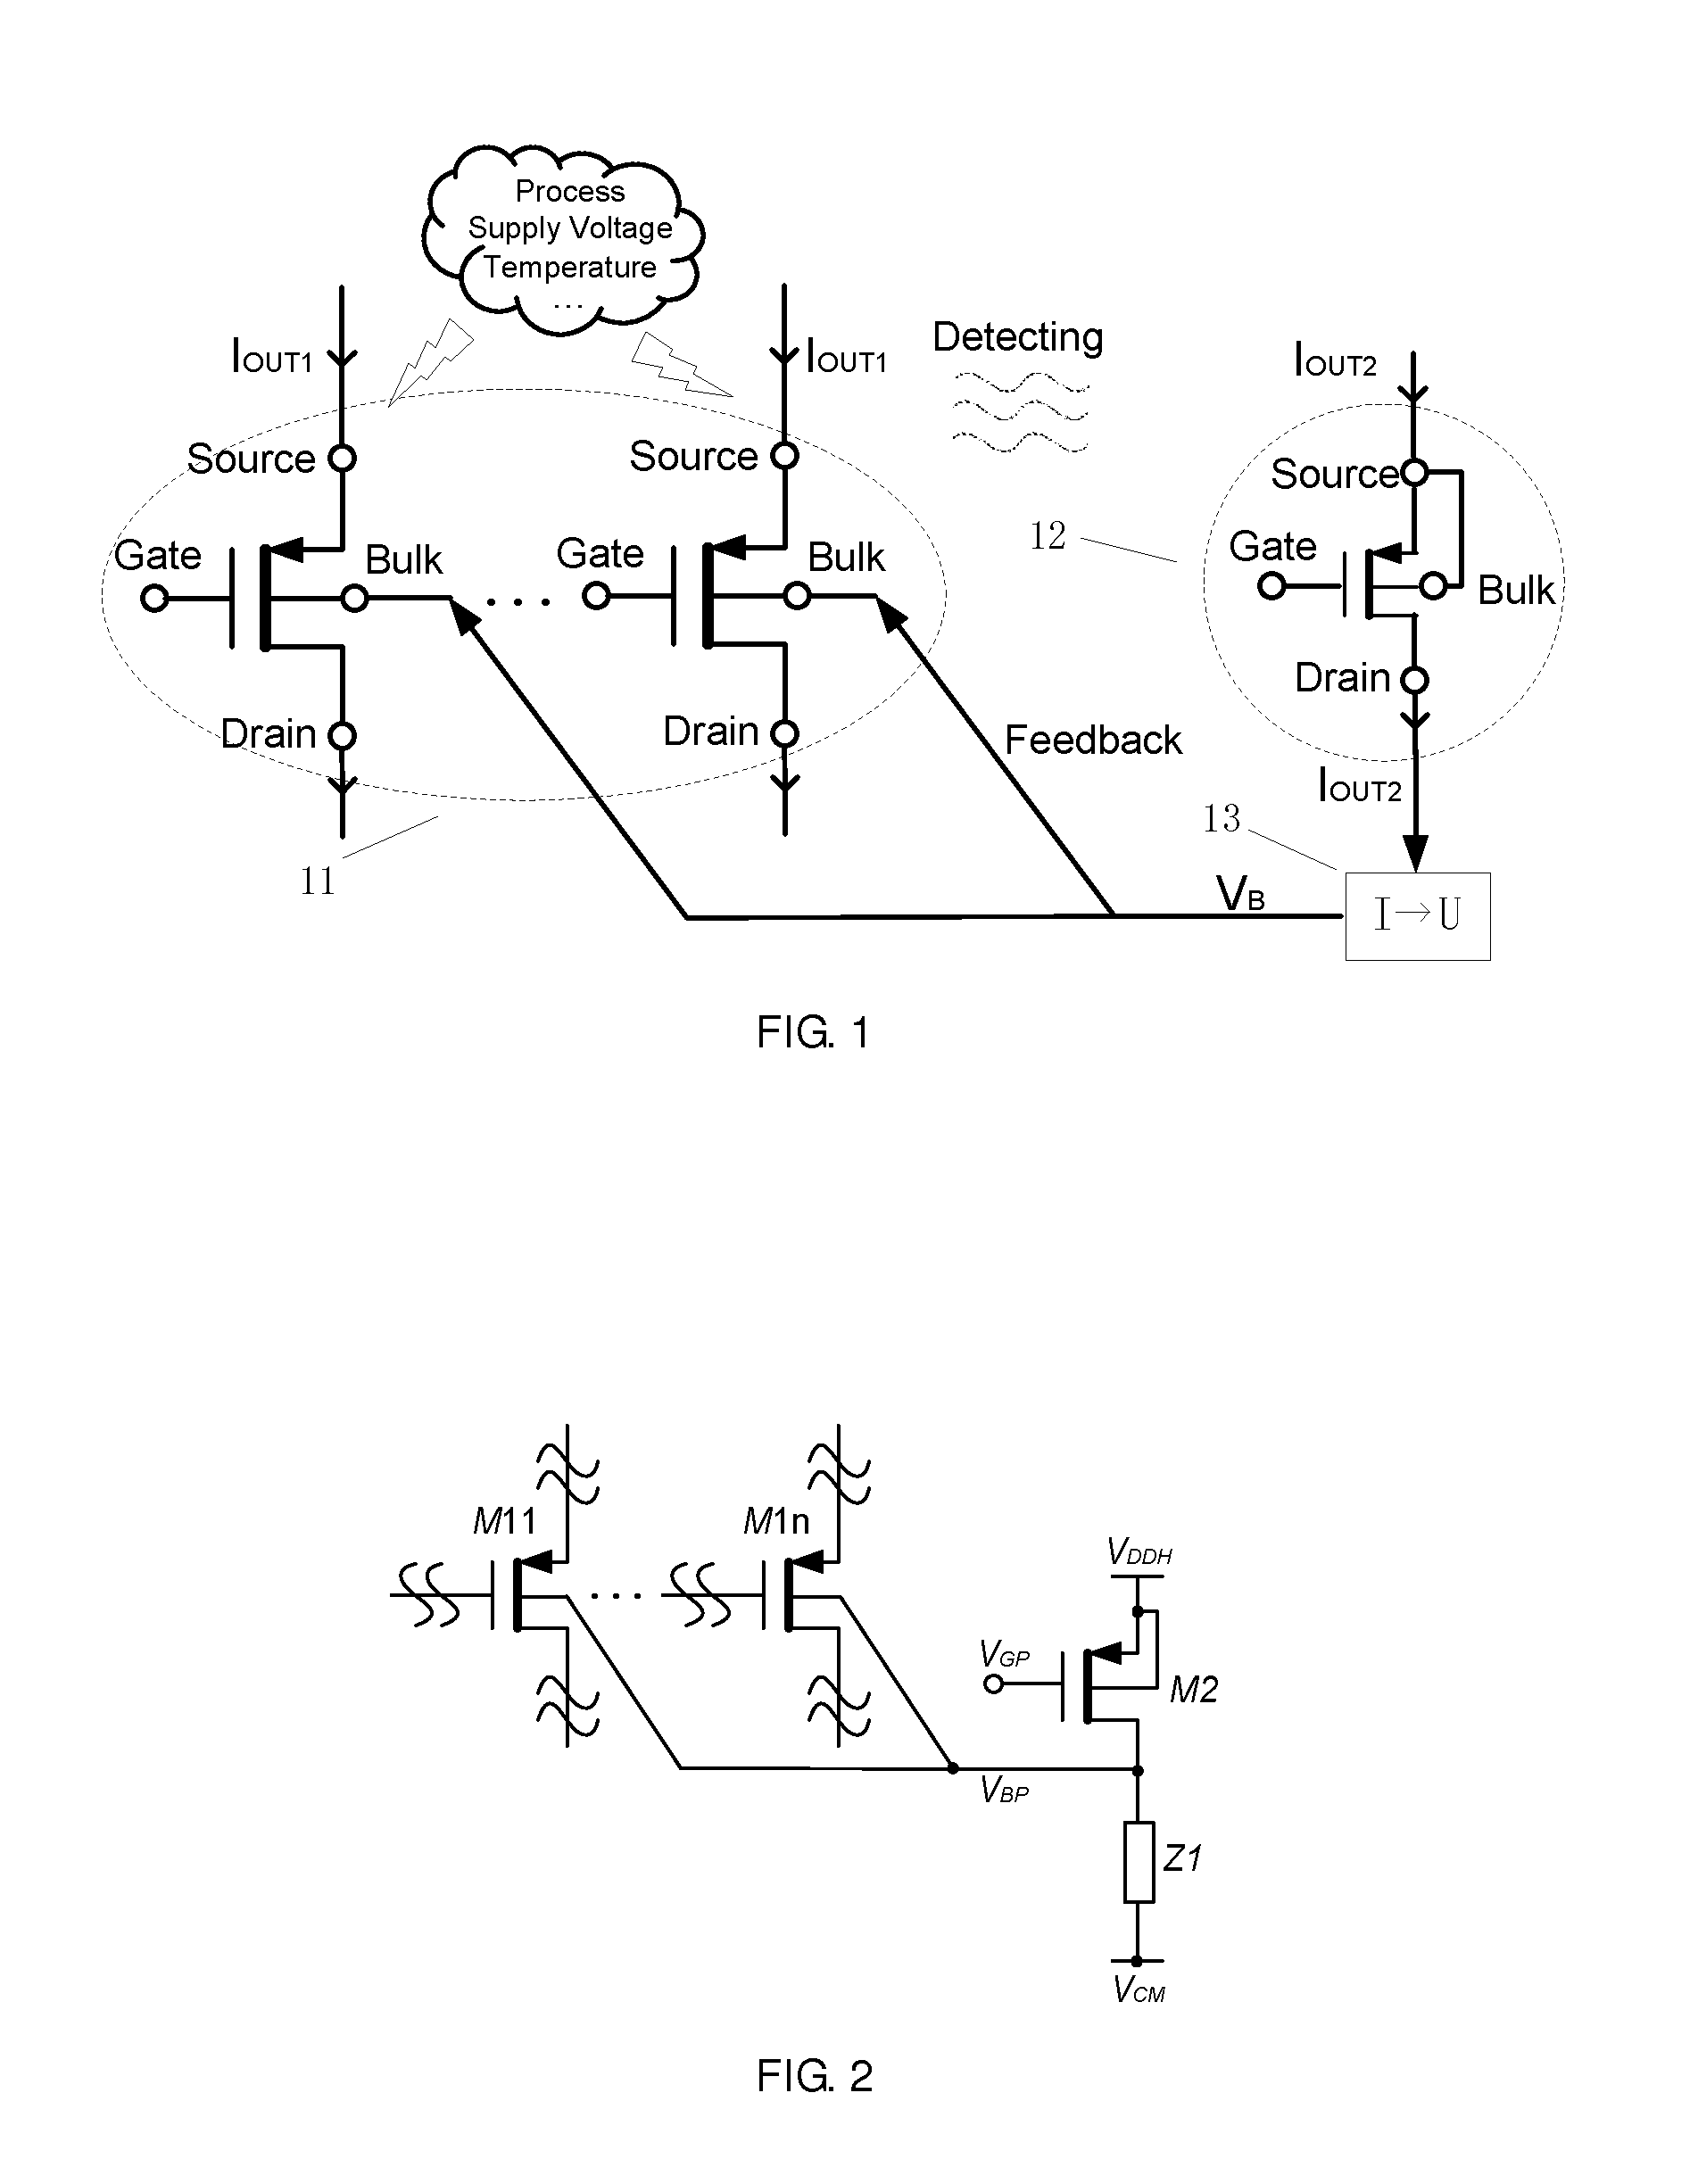 Method and circuit implementation for reducing the parameter fluctuations in integrated circuits